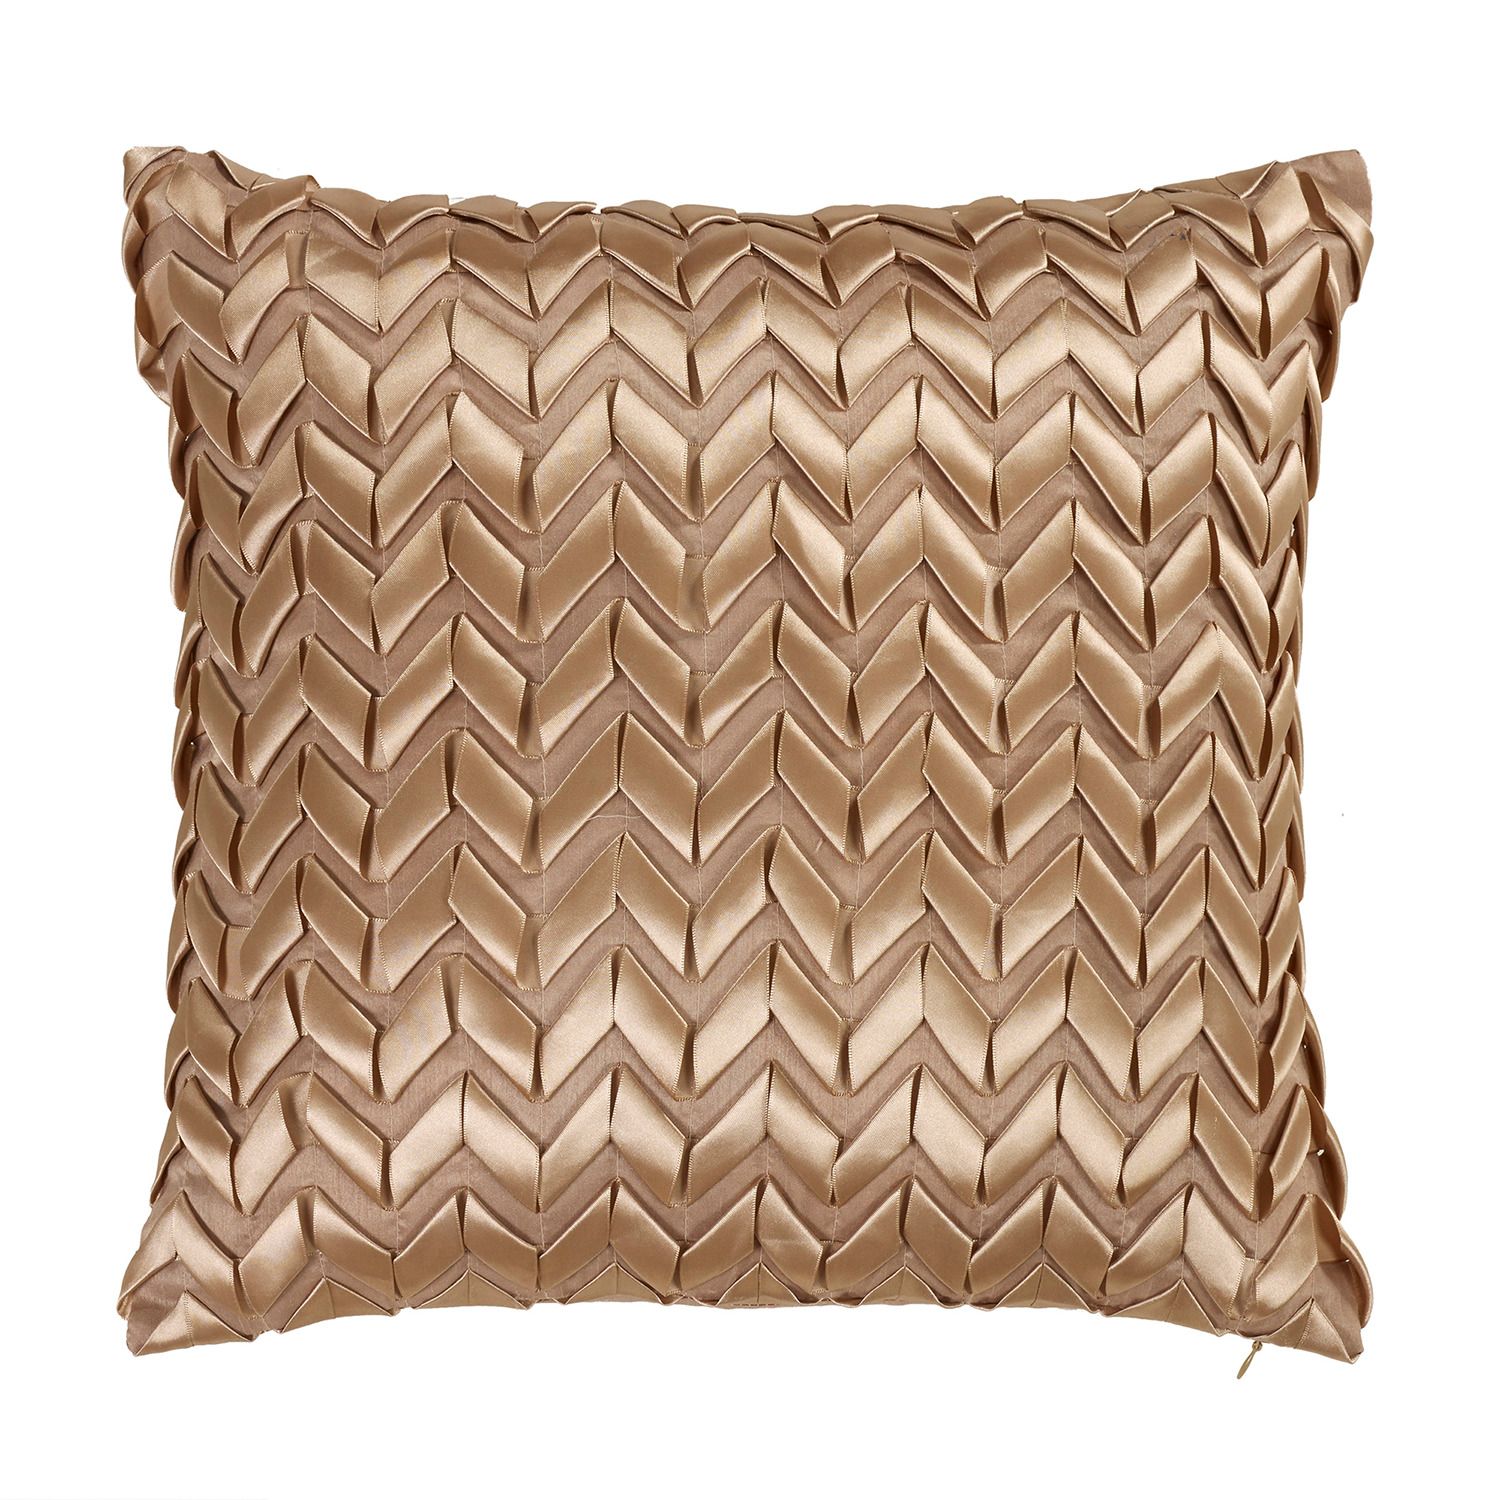 Image for Donna Sharp Texas Brown Ribbon Throw Pillow at Kohl's.